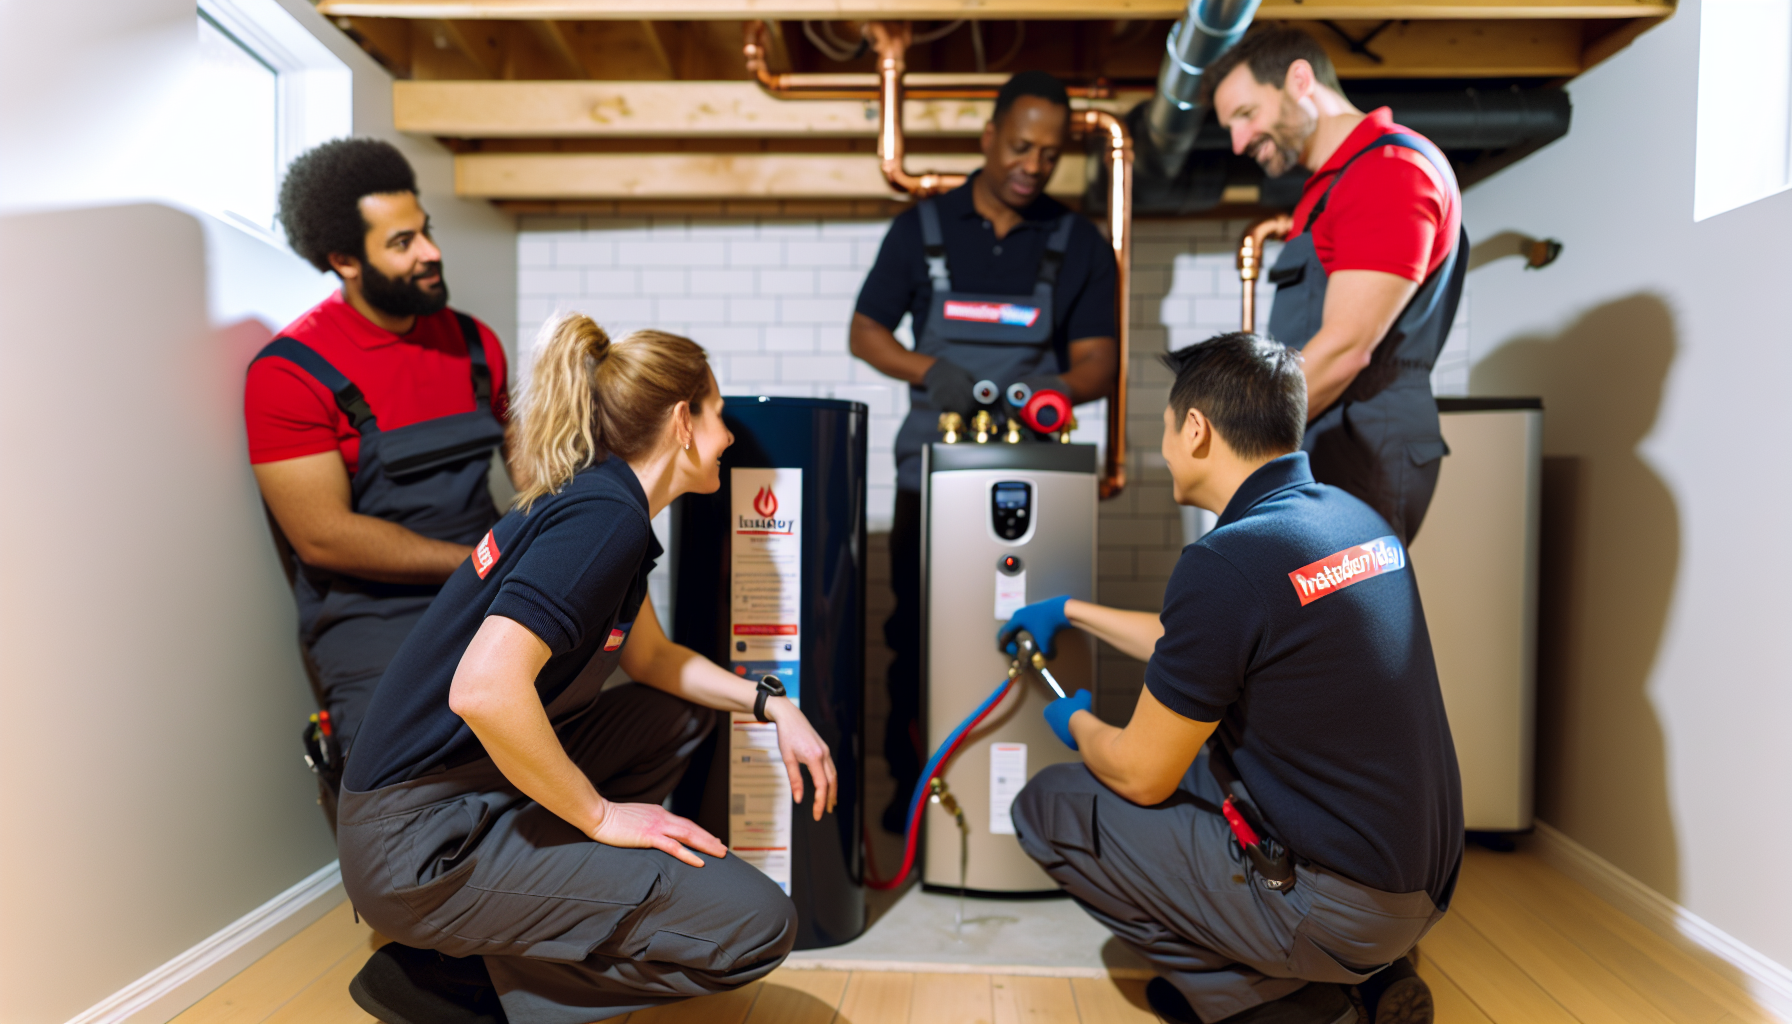 Professional installation and maintenance services provided by InstalledToday for hot water systems